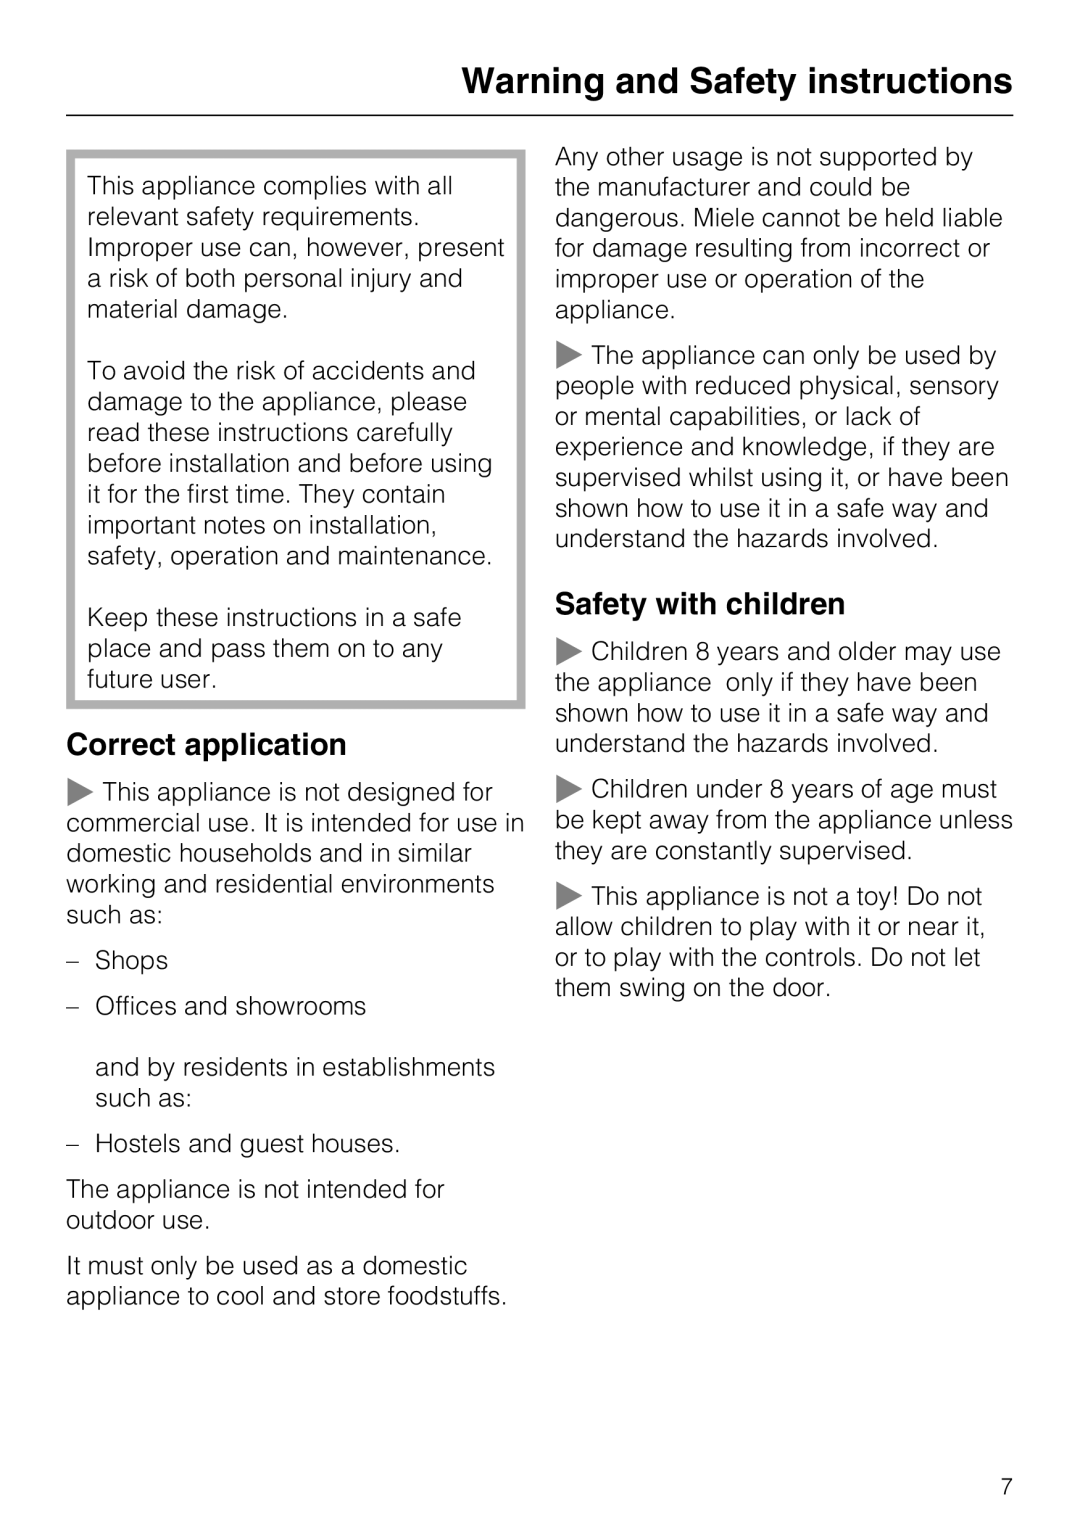 Miele K 12421 SD installation instructions Warning and Safety instructions, Correct application, Safety with children 